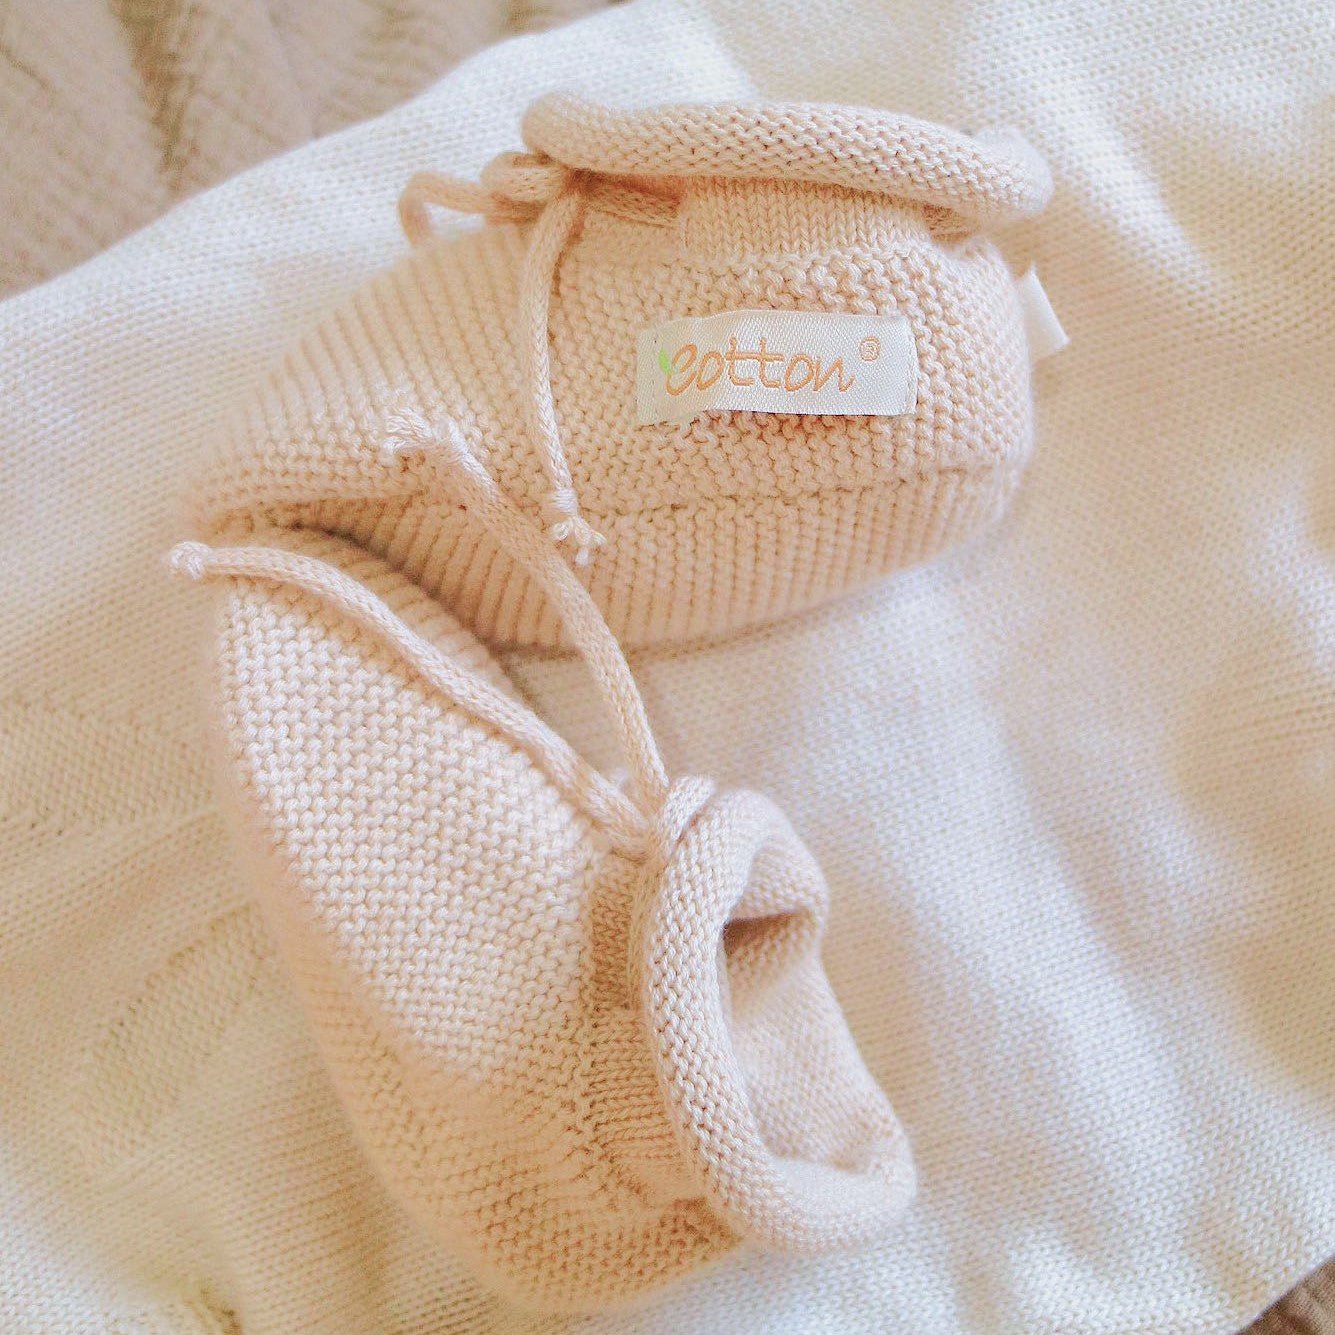 Organic Cable Knit Baby Booties - Soft Newborn Booties for Cozy Little Feet